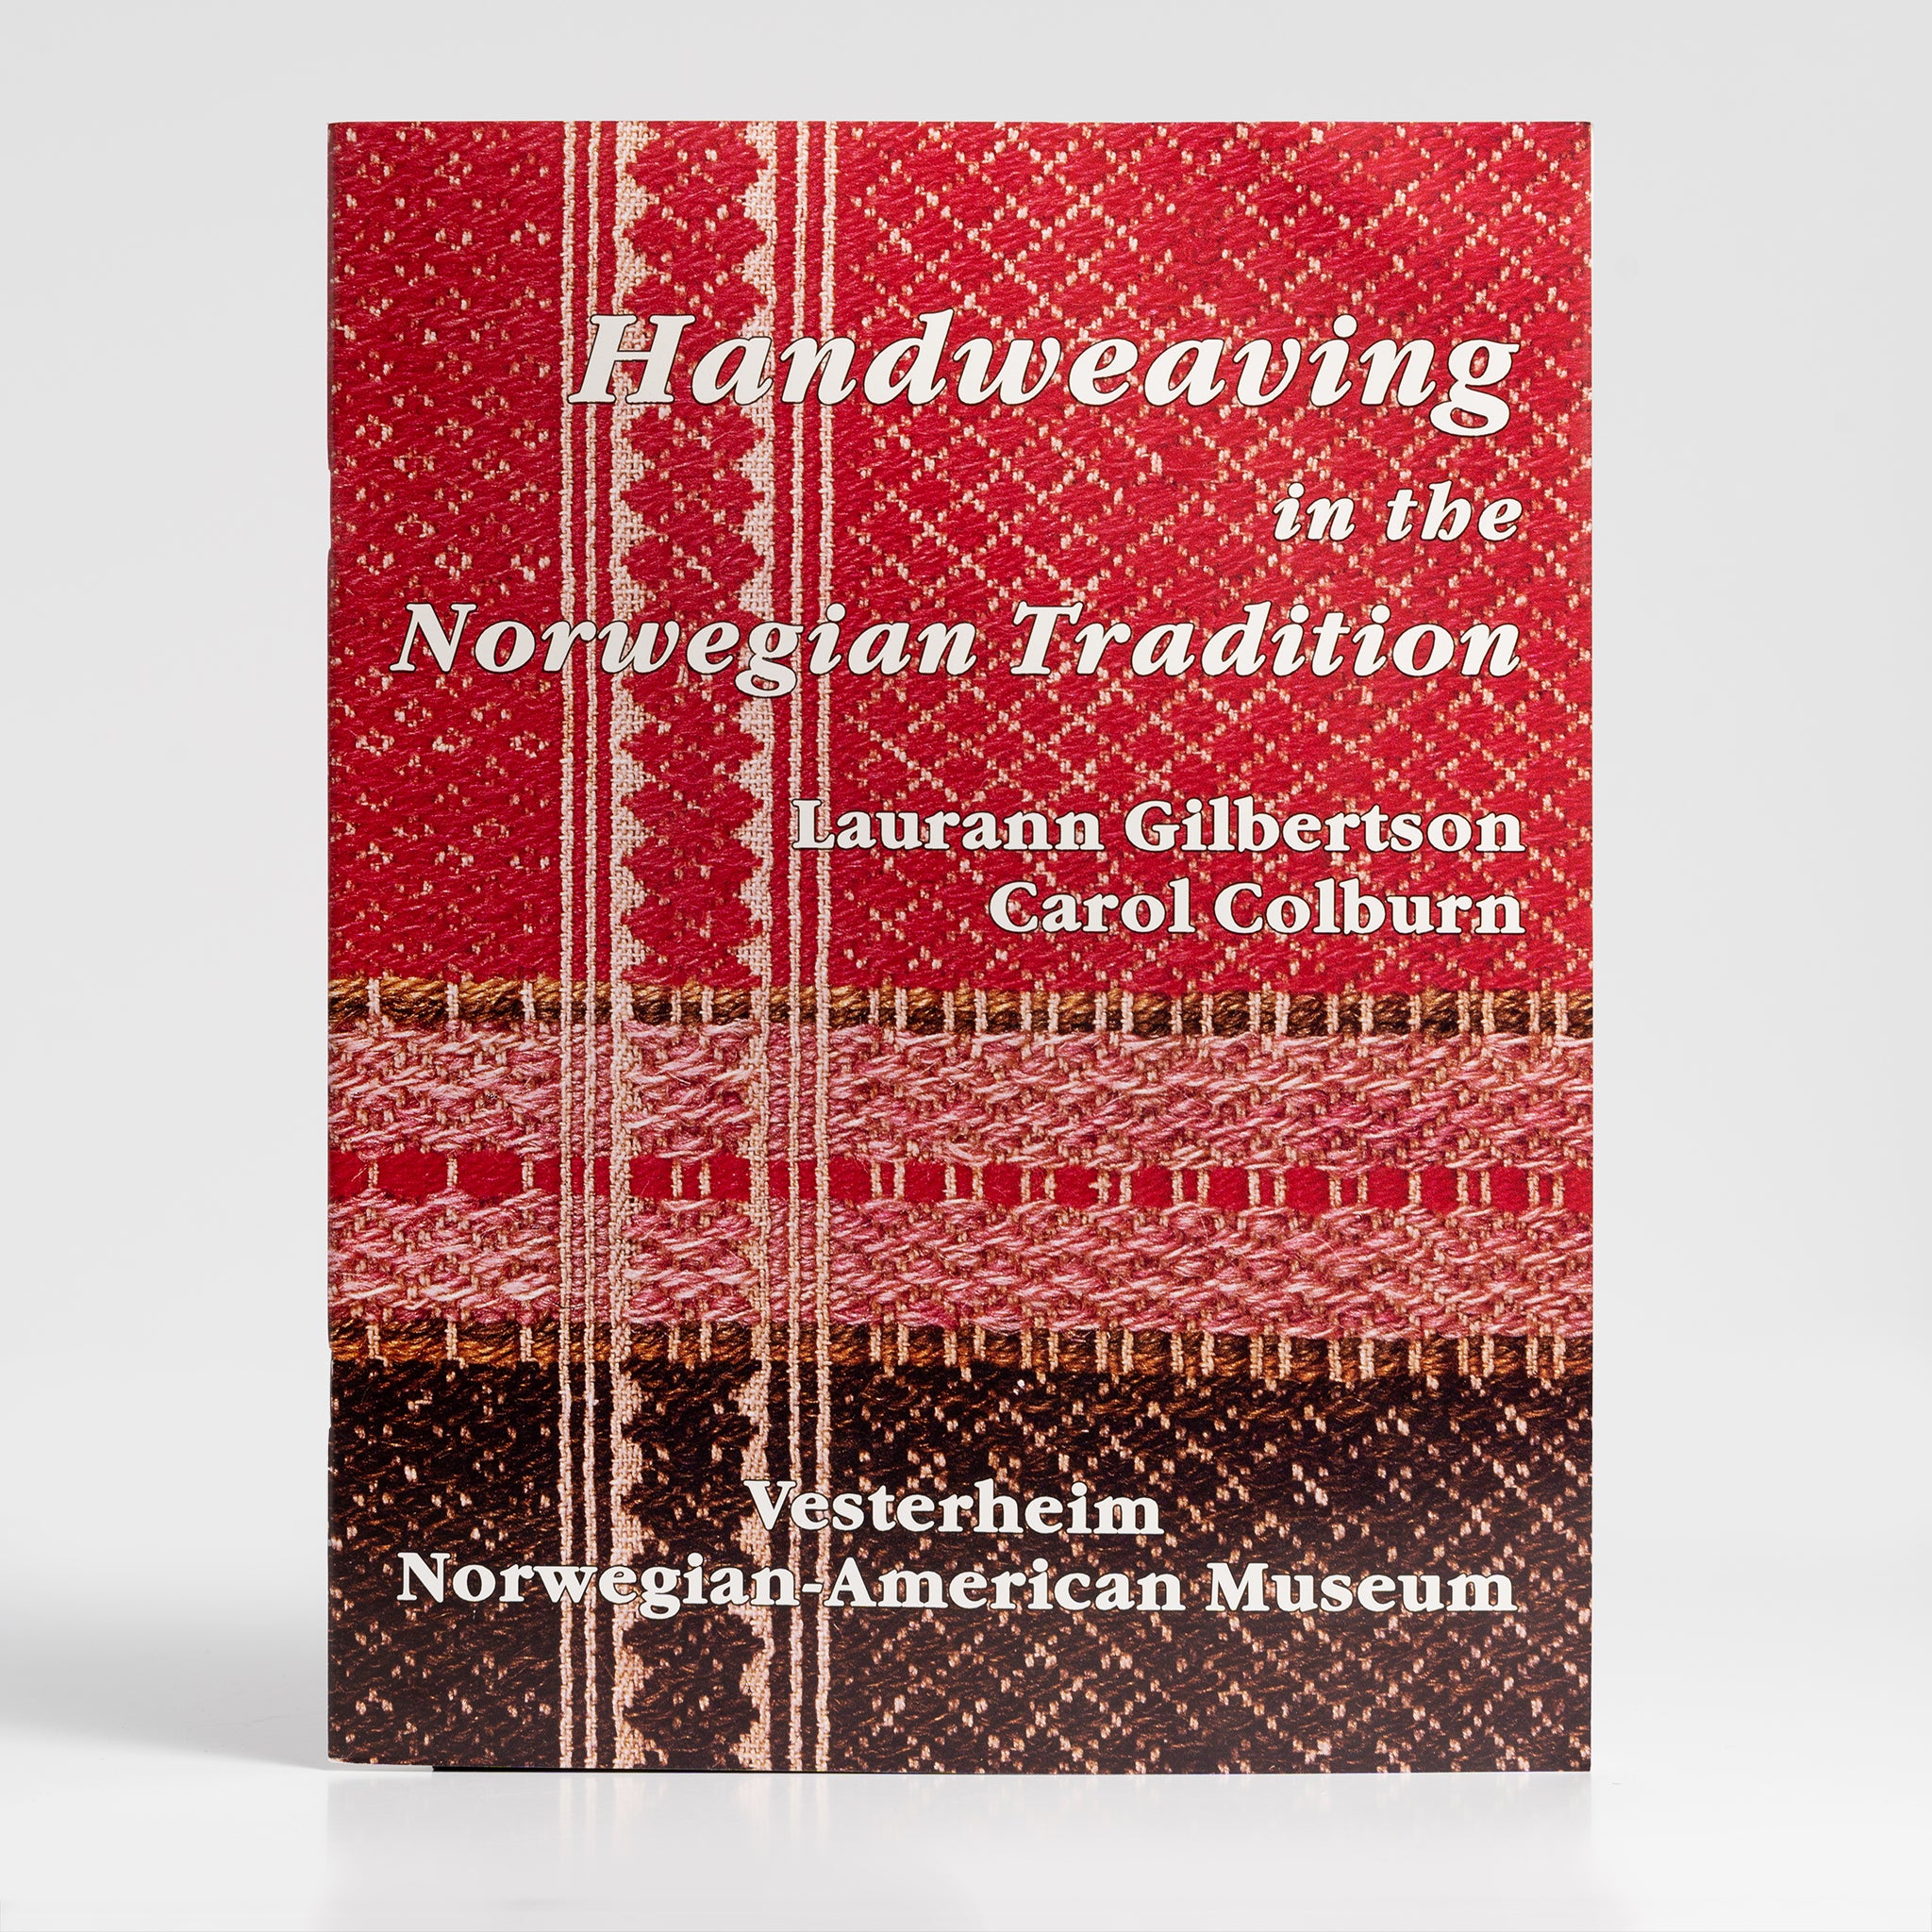 Handweaving In The Norwegian Tradition by Laurann Gilbertson and Carol Colburn